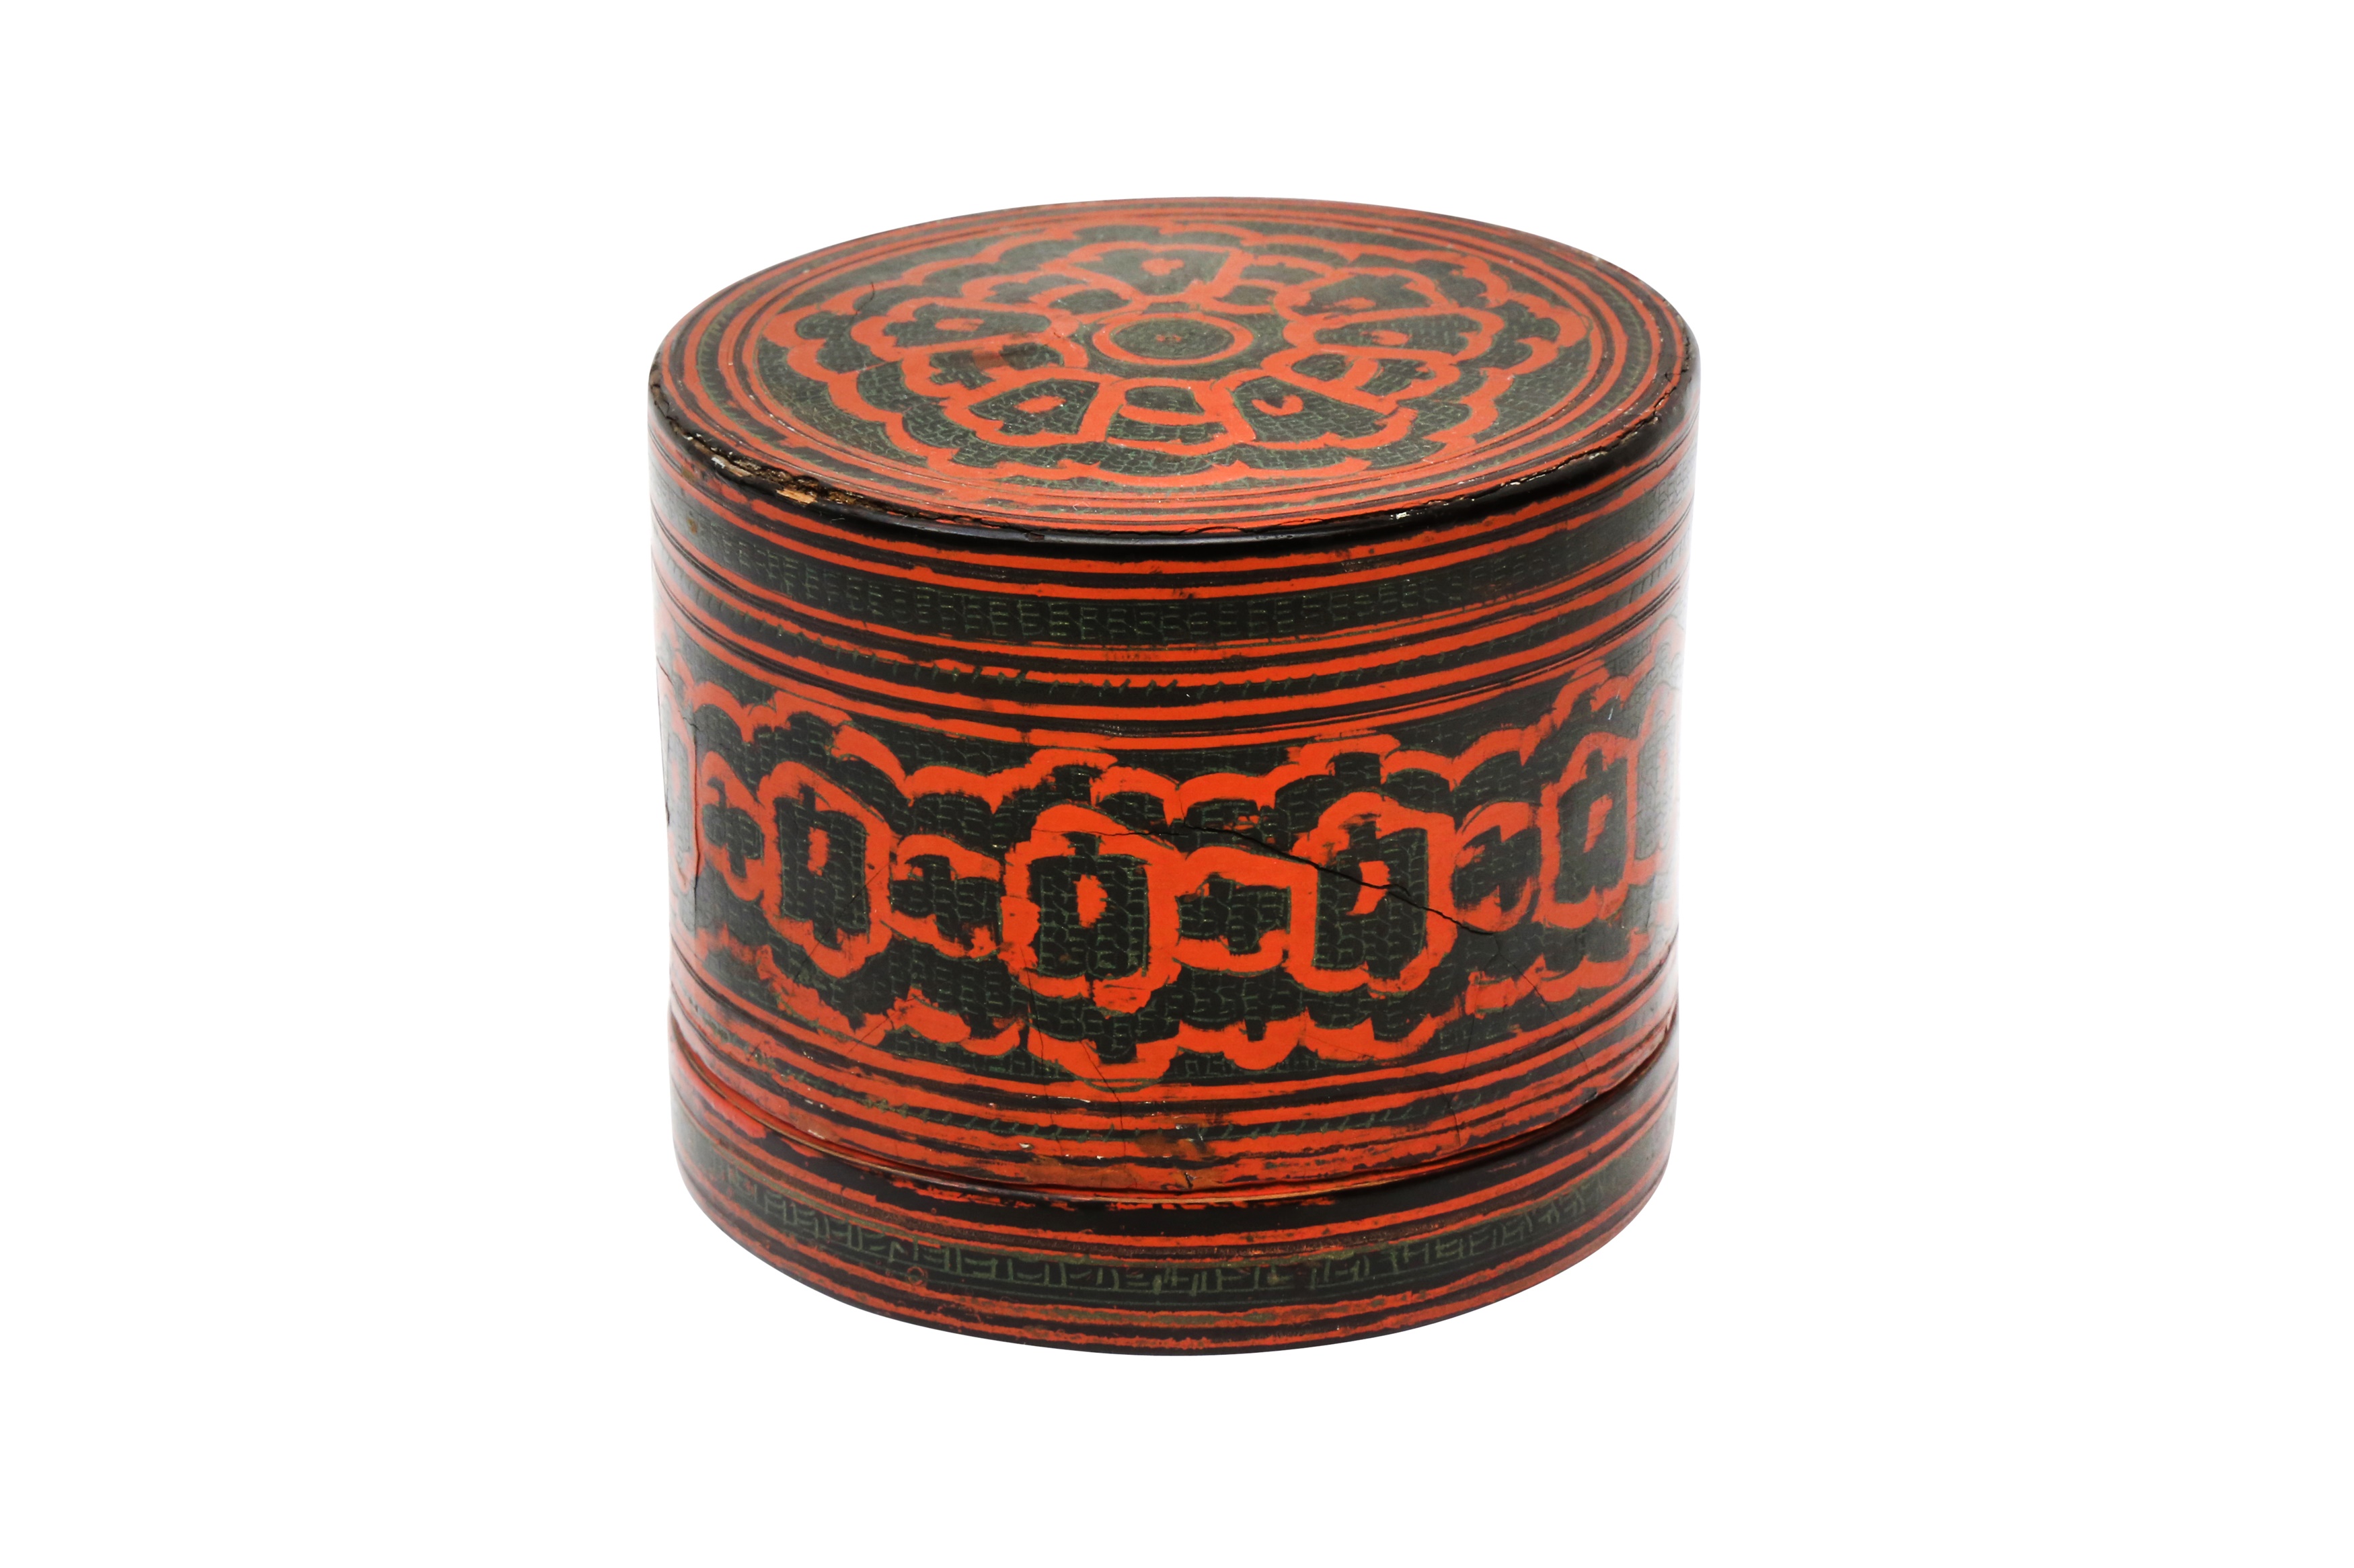 A SMALL BURMESE RED AND BLACK LACQUER BETEL-BOX AND COVER OFFERED ON BEHALF OF PROSPECT BURMA TO